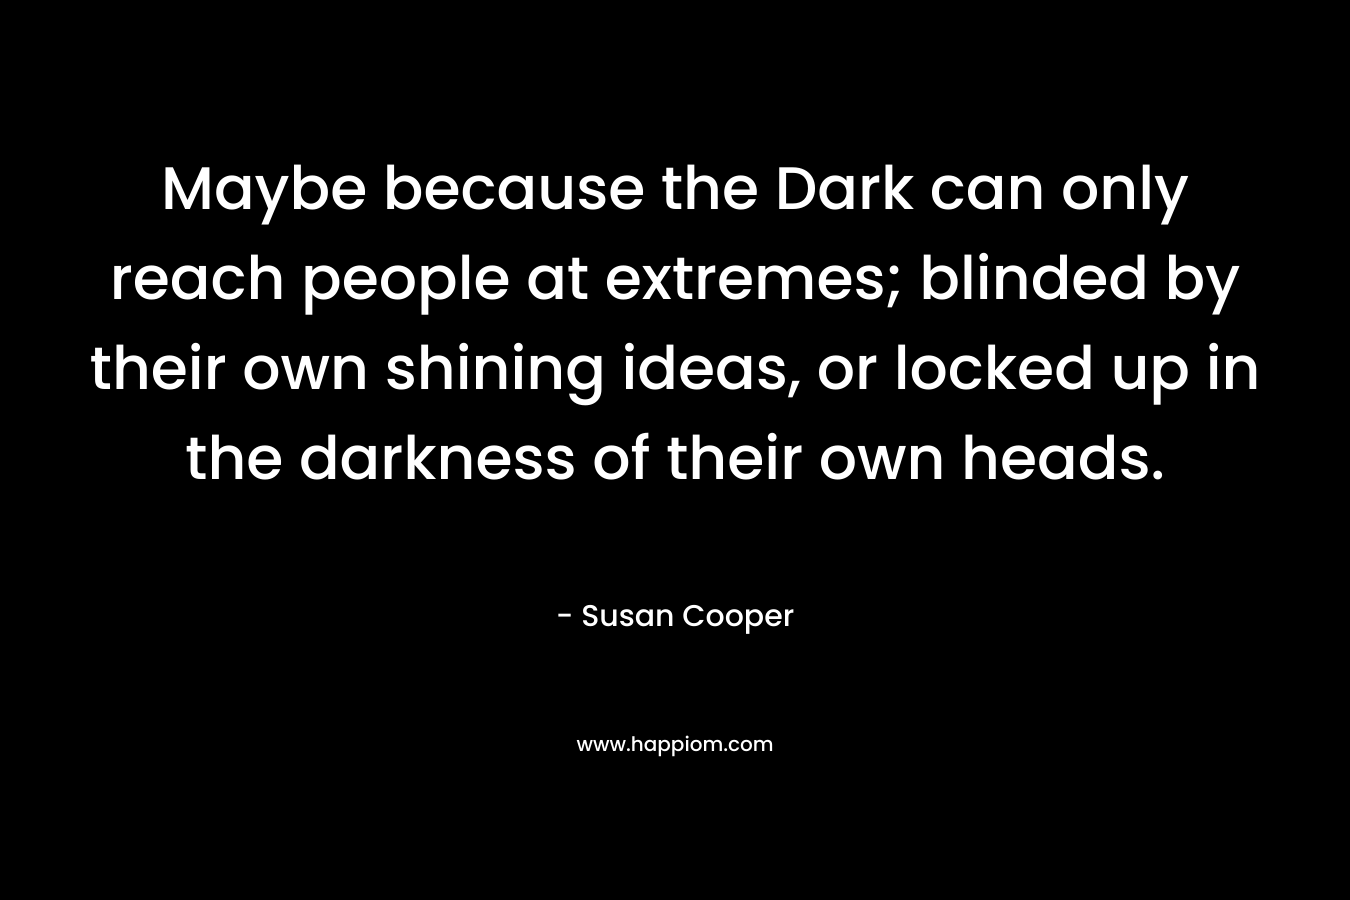 Maybe because the Dark can only reach people at extremes; blinded by their own shining ideas, or locked up in the darkness of their own heads. – Susan Cooper